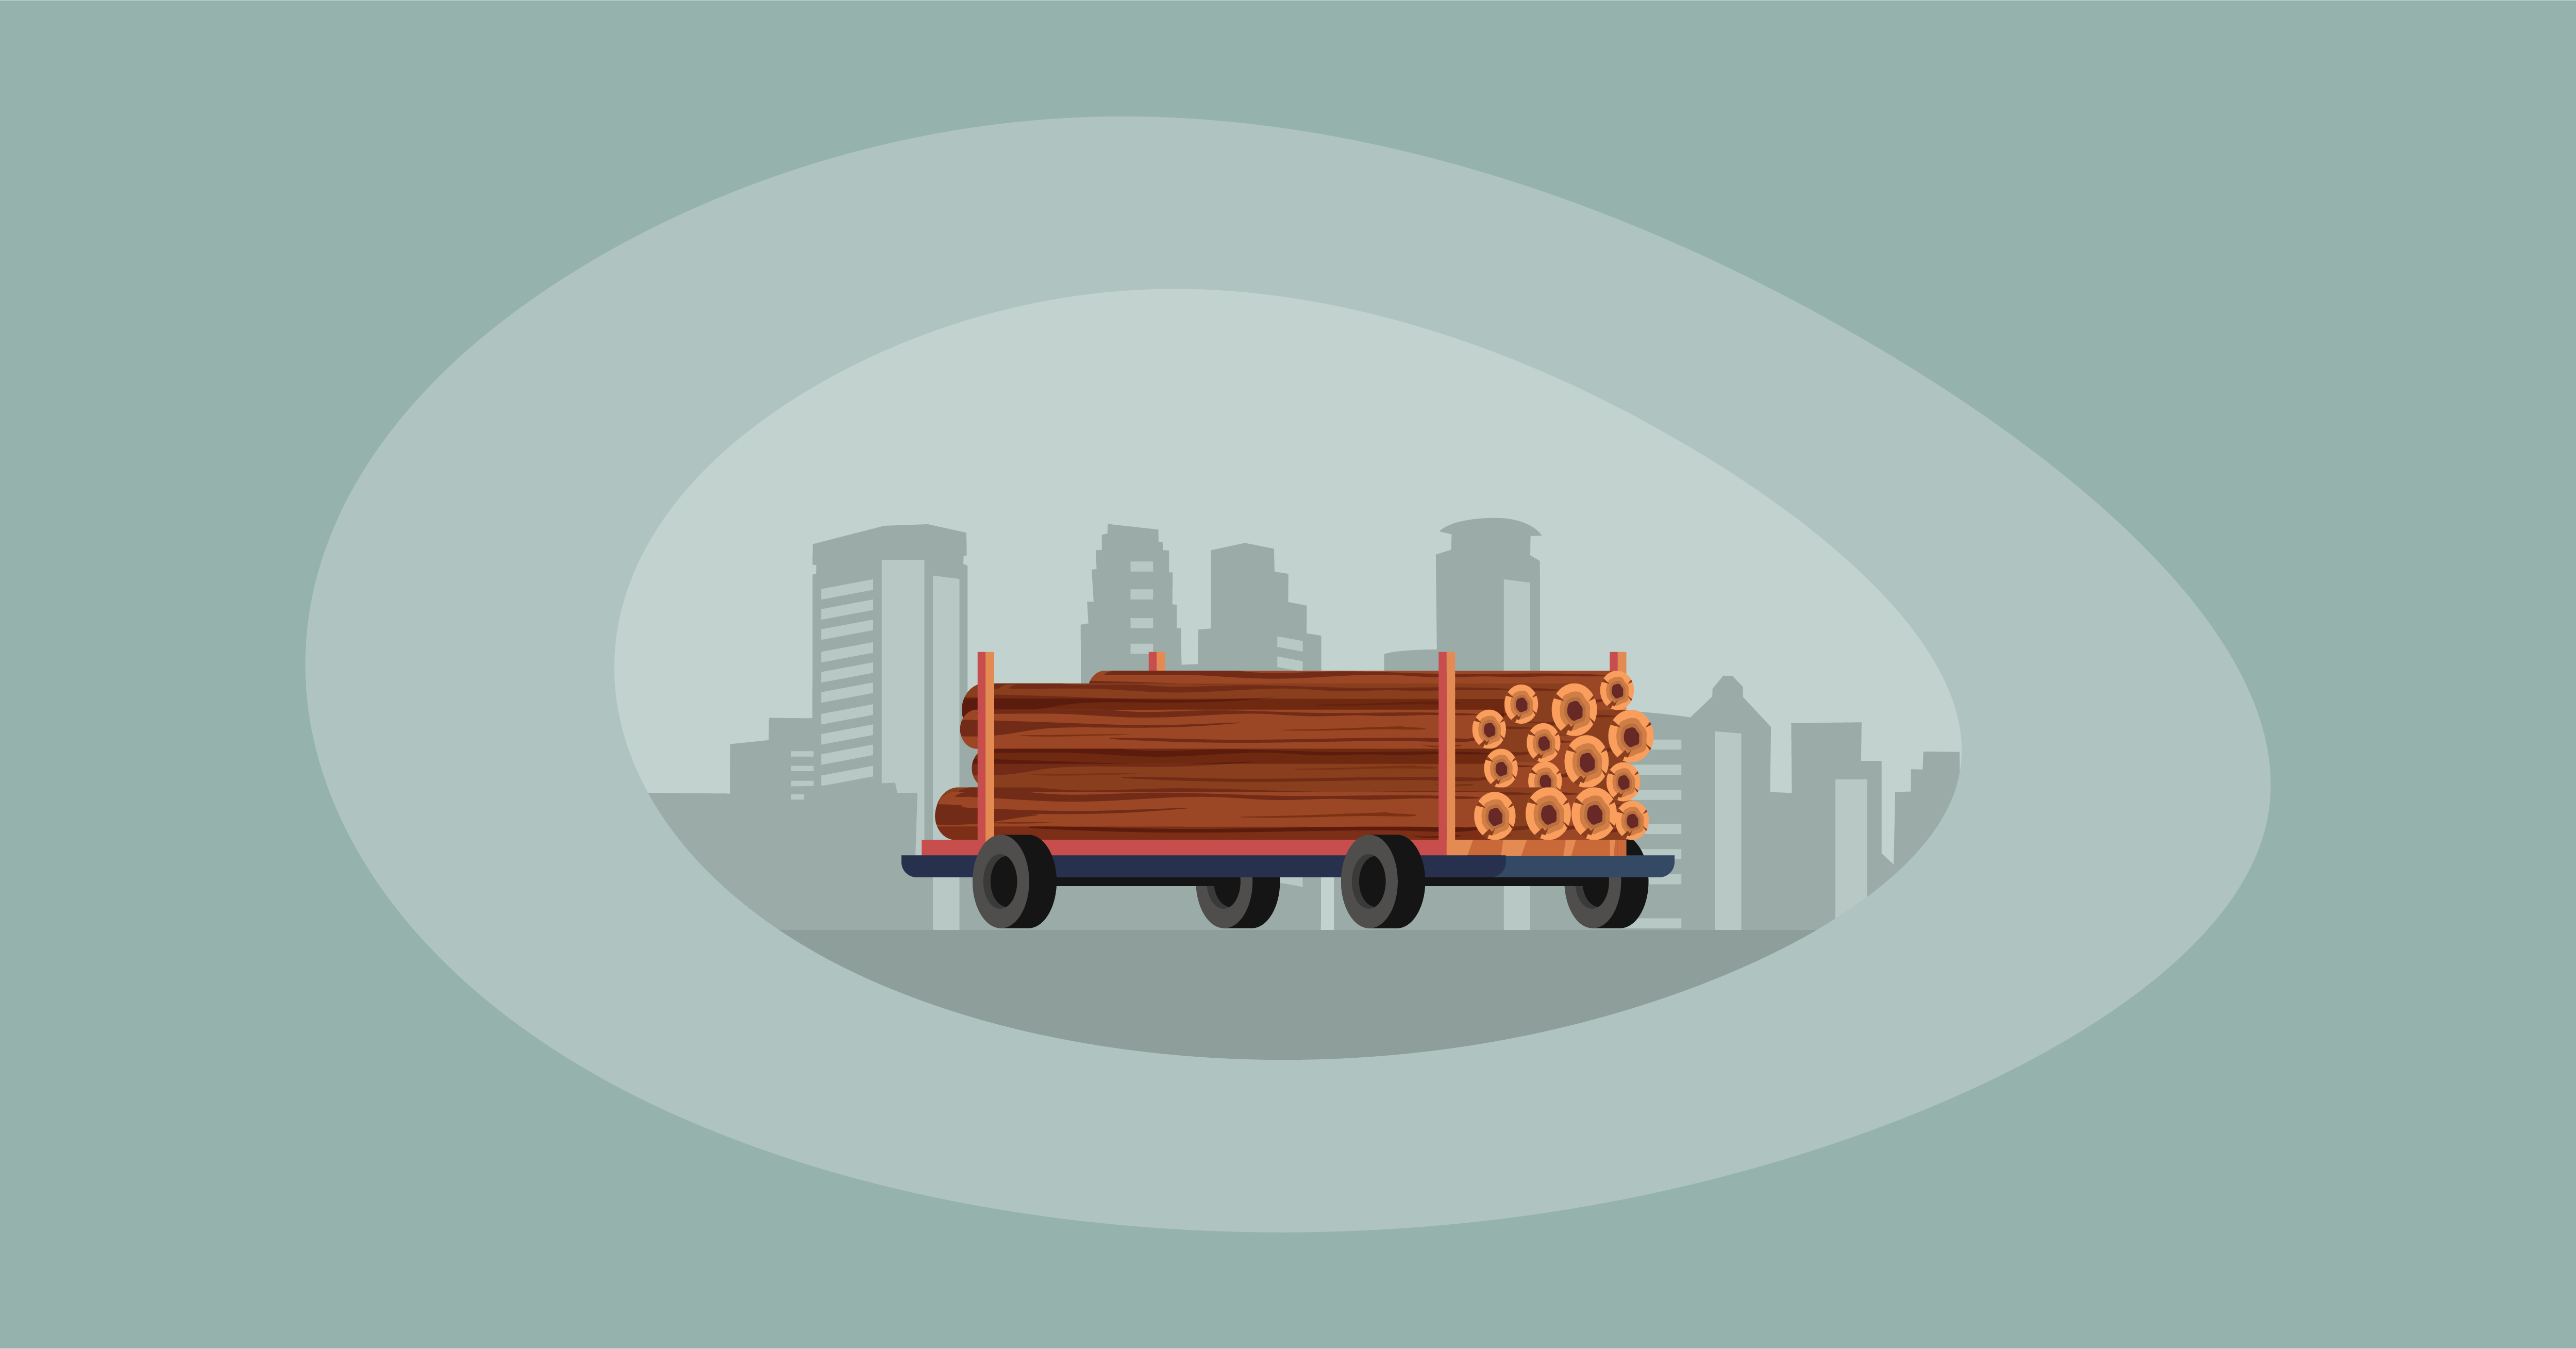 Illustration of wood logs in a cart